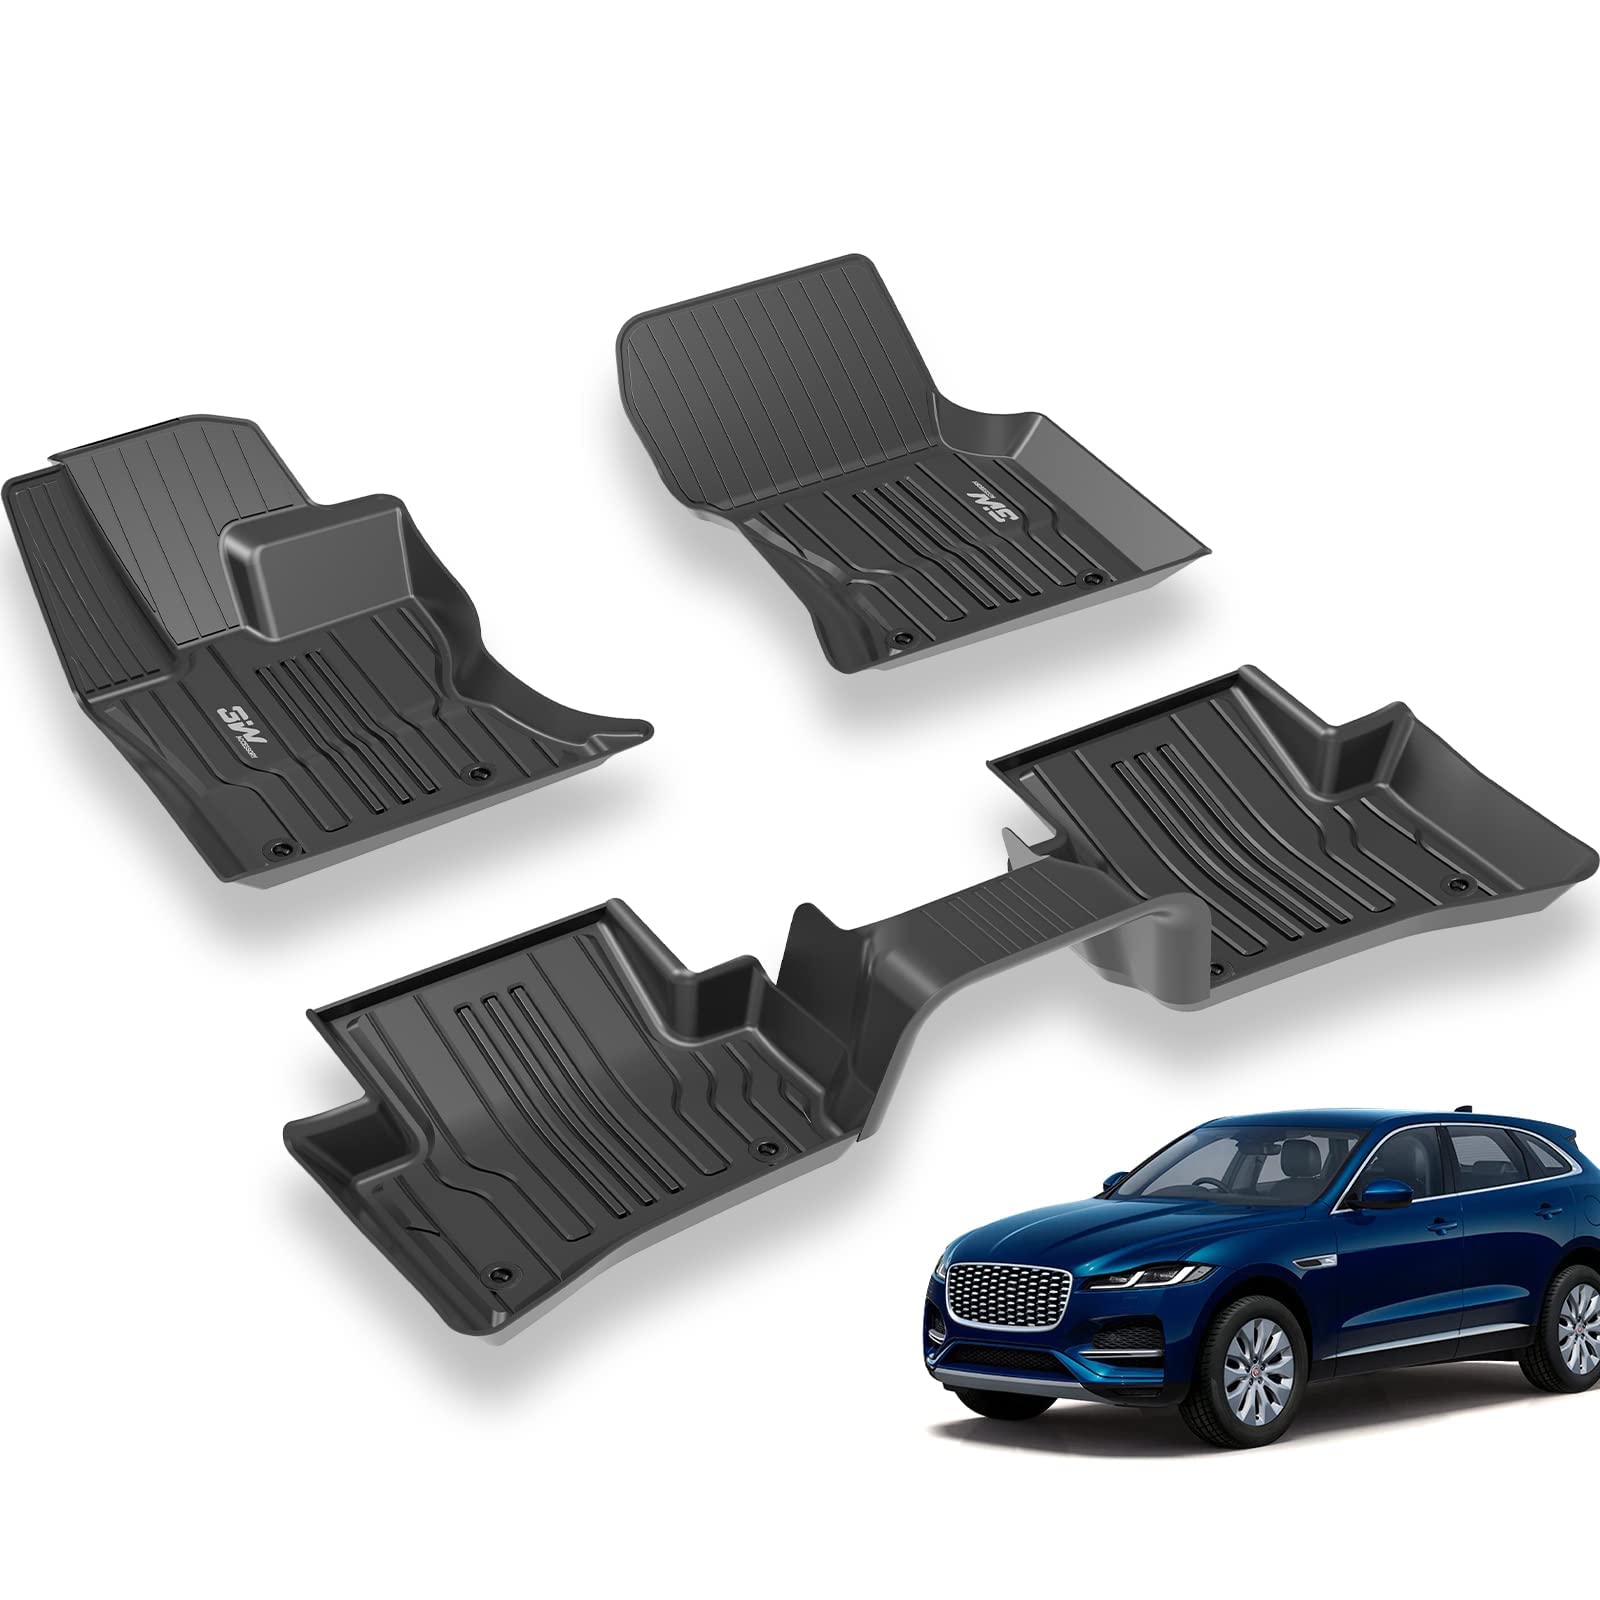 3W Jaguar F-pace 2017-2024 Custom Floor Mats TPE Material & All-Weather Protection Vehicles & Parts 3Wliners   